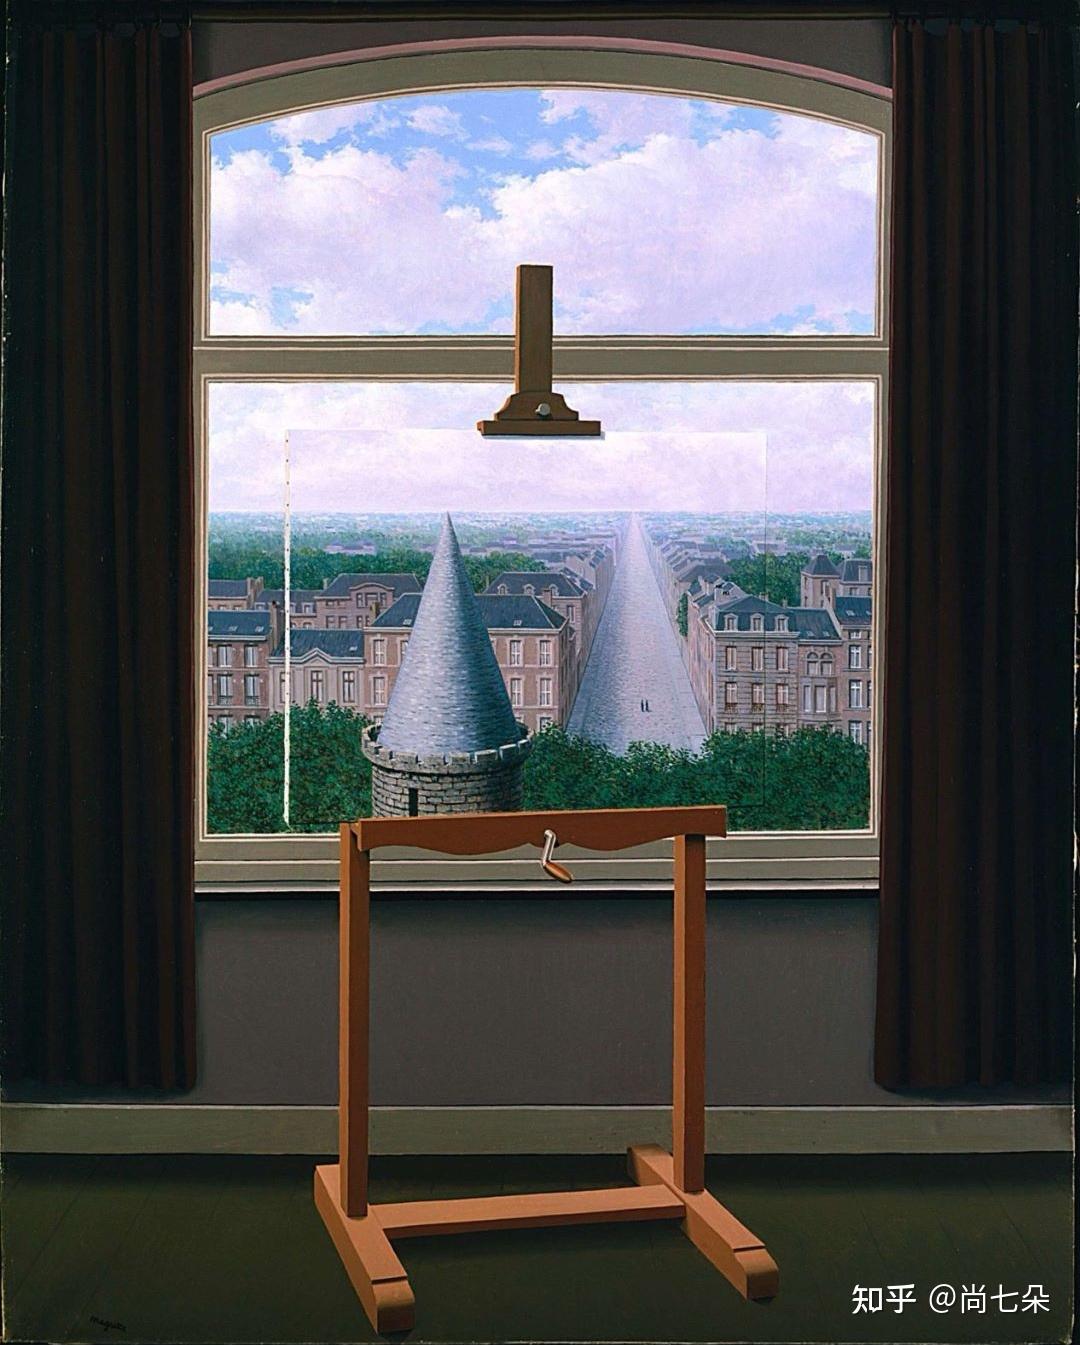 The big family - Rene Magritte - WikiArt.org - encyclopedia of visual arts